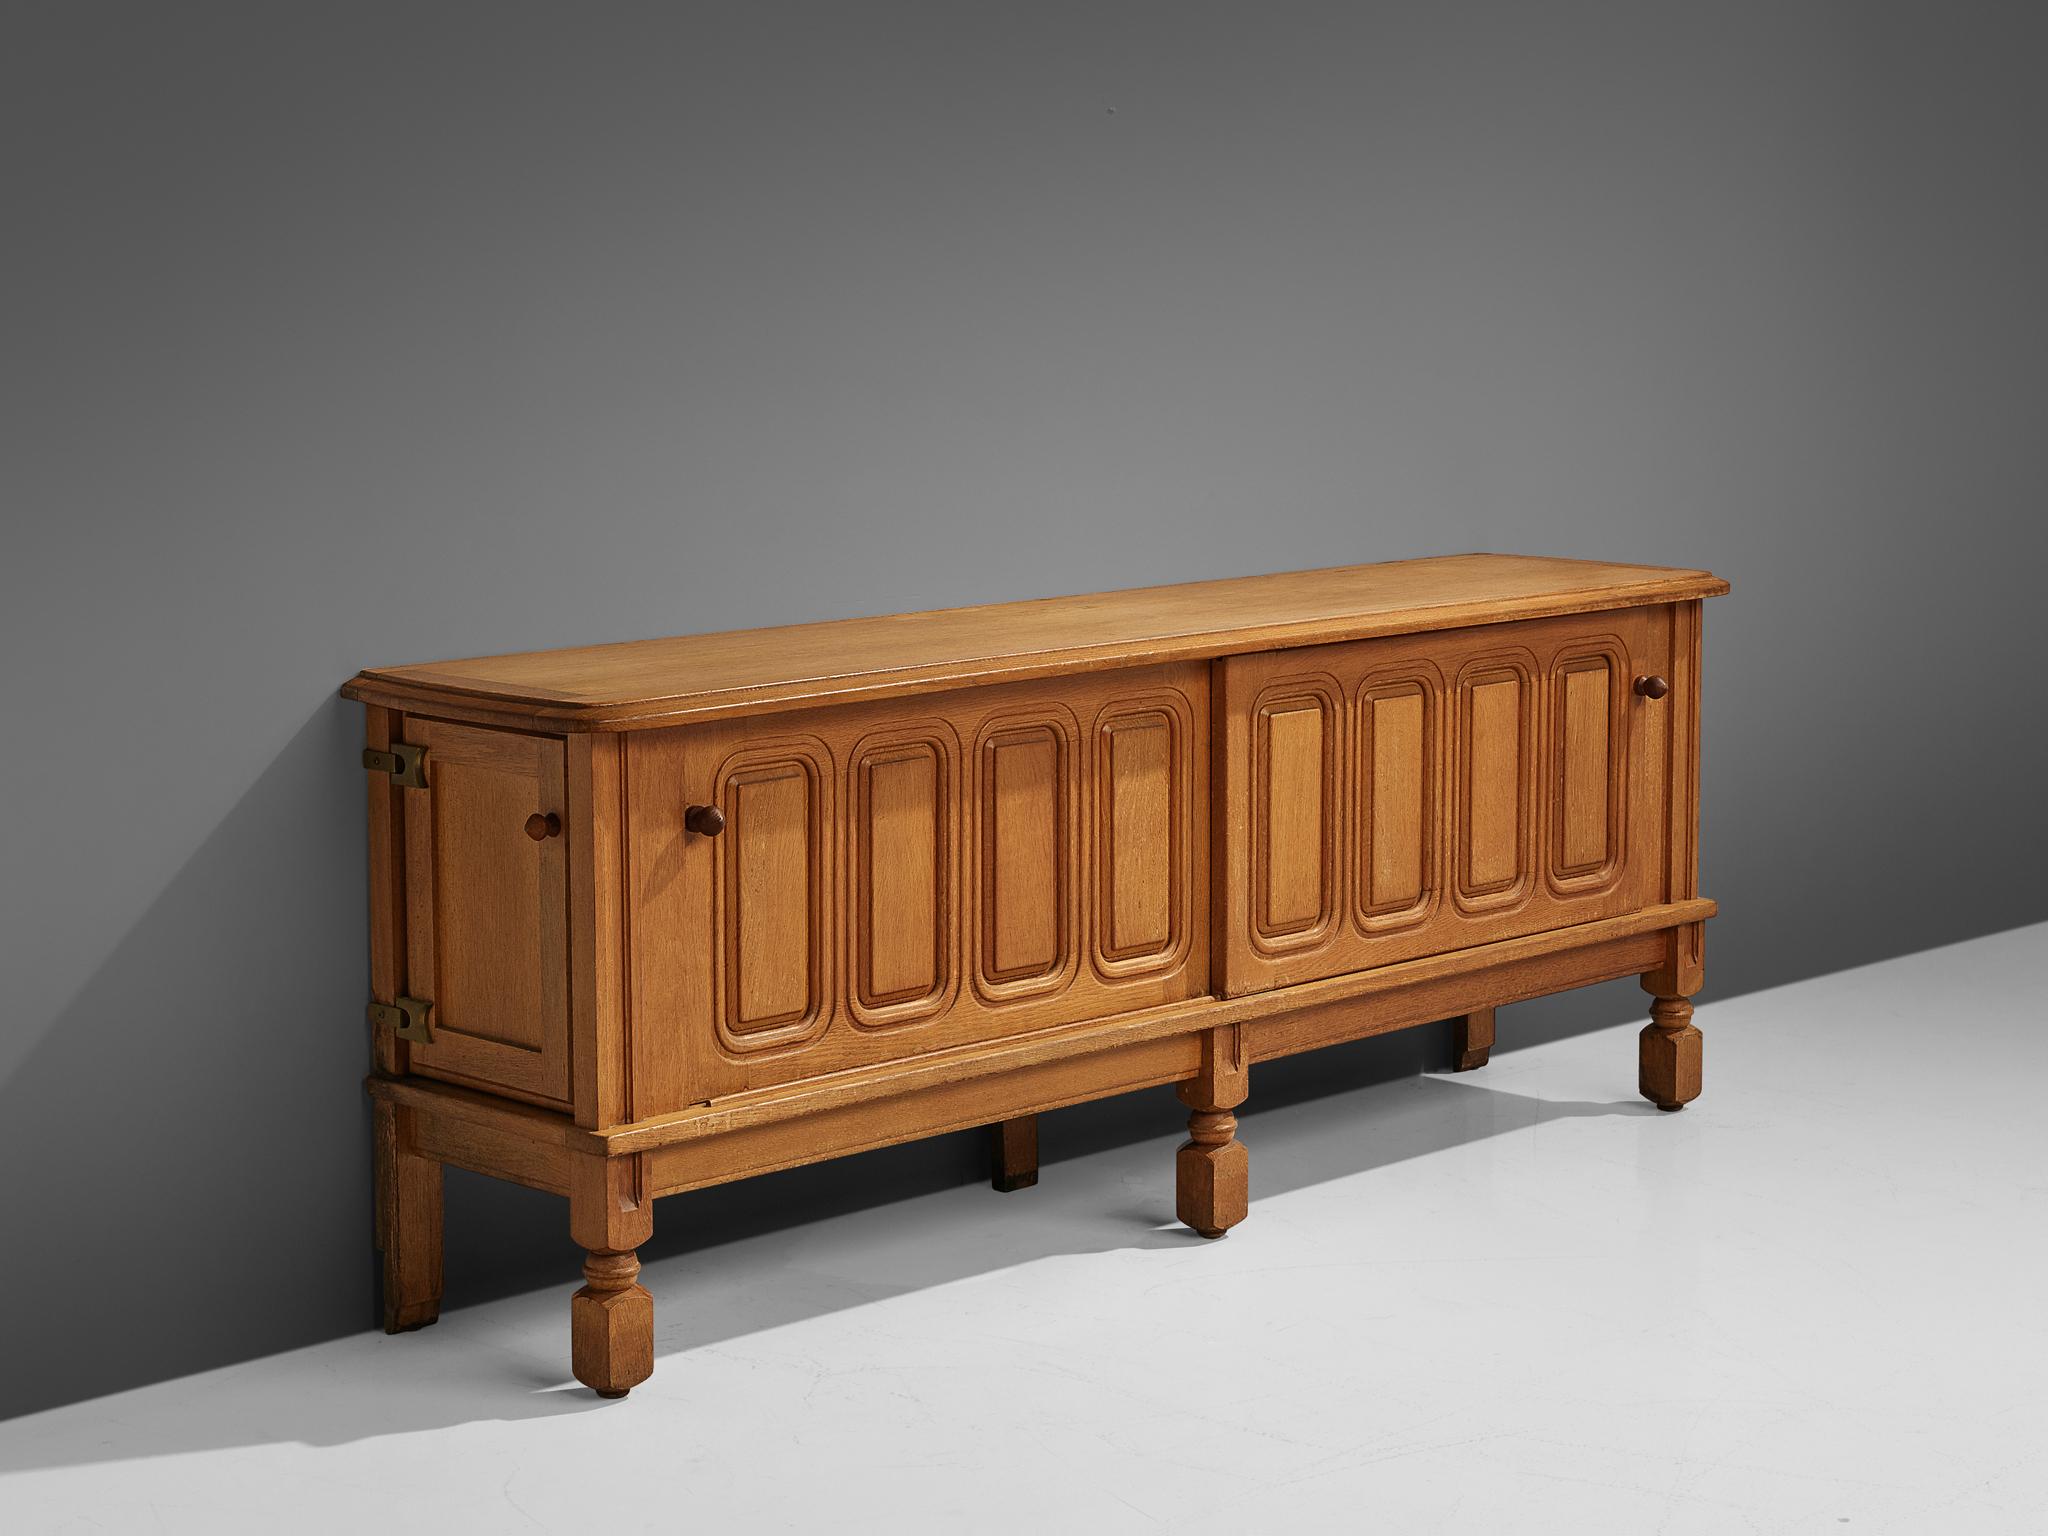 Guillerme et Chambron for Votre Maison, credenza, in oak and ceramic, France, 1960s.

Characteristic sideboard in solid oak. This cabinet holds the characteristics of the French designer duo Jacques Chambron and Robert Guillerme. As many of the